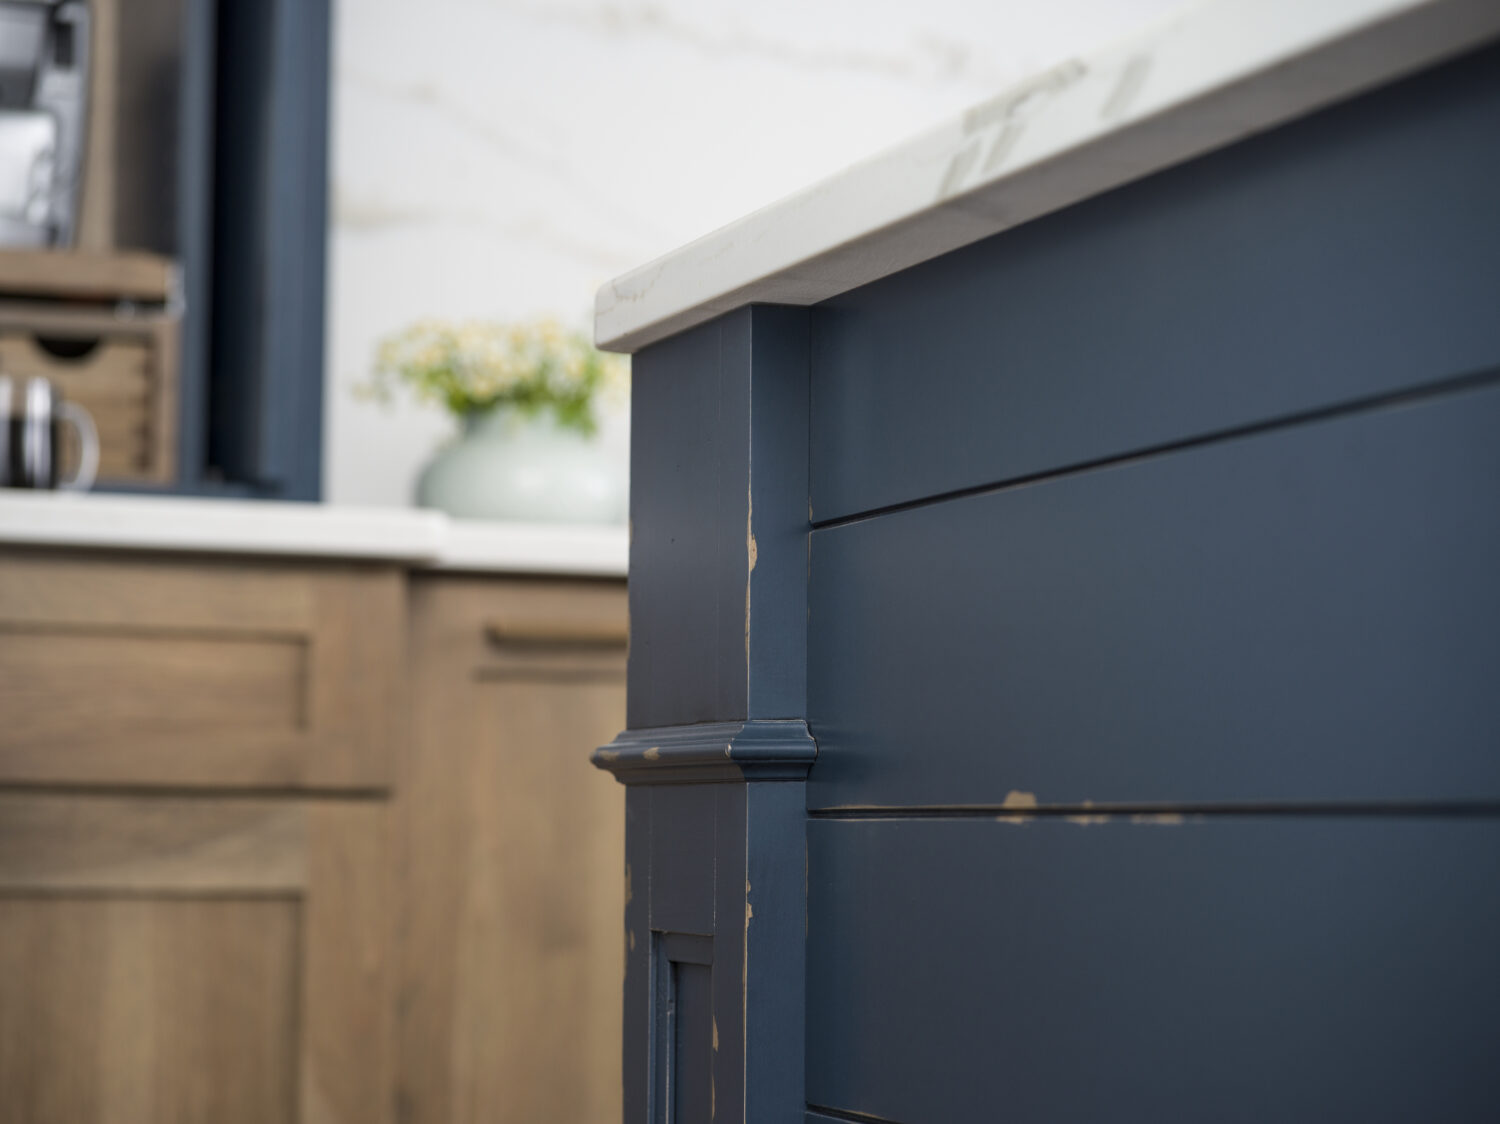 A close up of the kitchen island end cap with shiplap panels and a decorative column with a distressed navy blue painted finish.